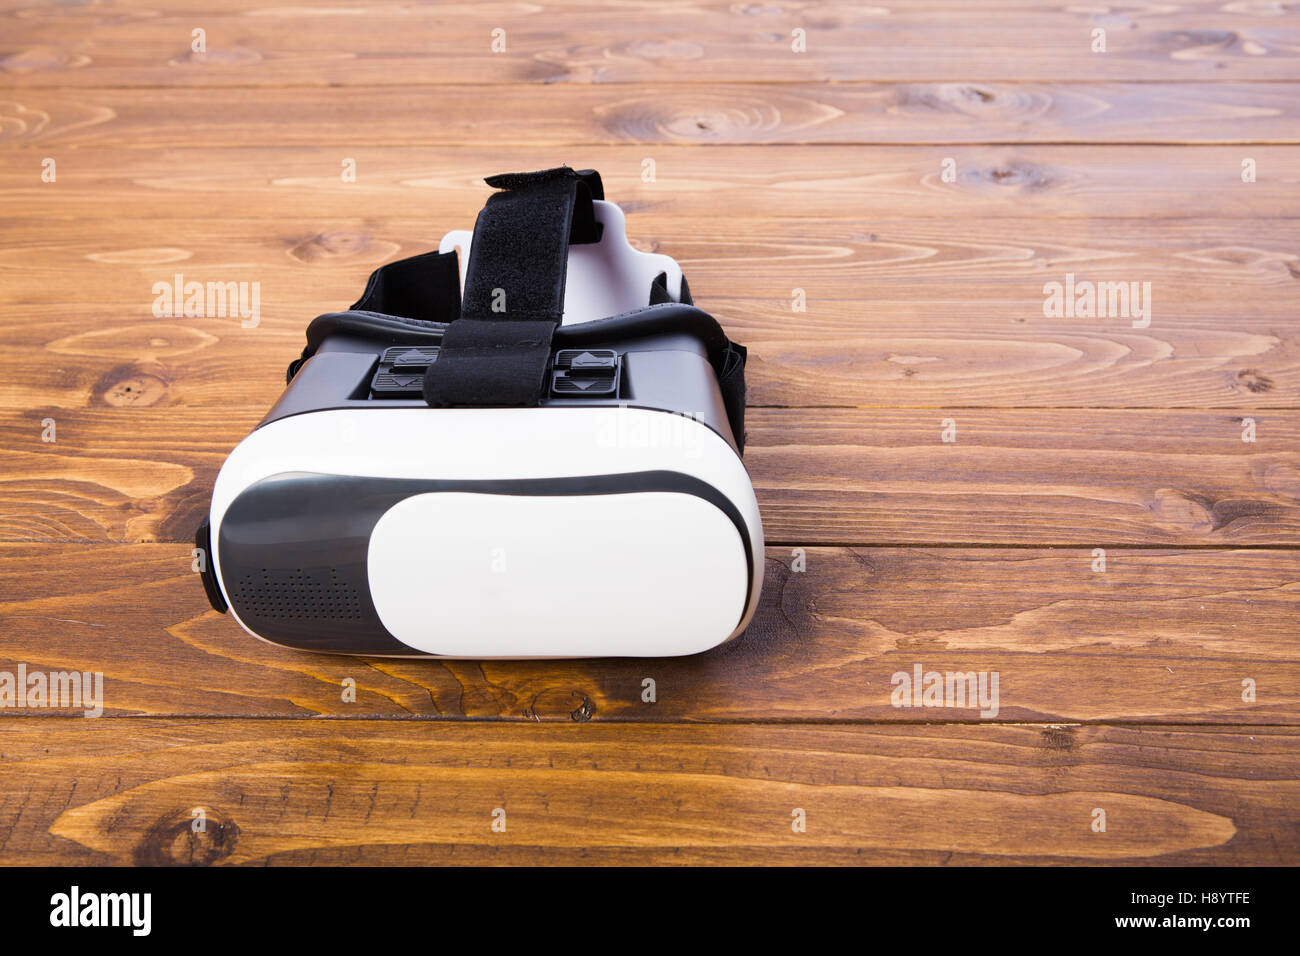 front side of a vr headset, isolated on wooden floor background, close up Stock Photo